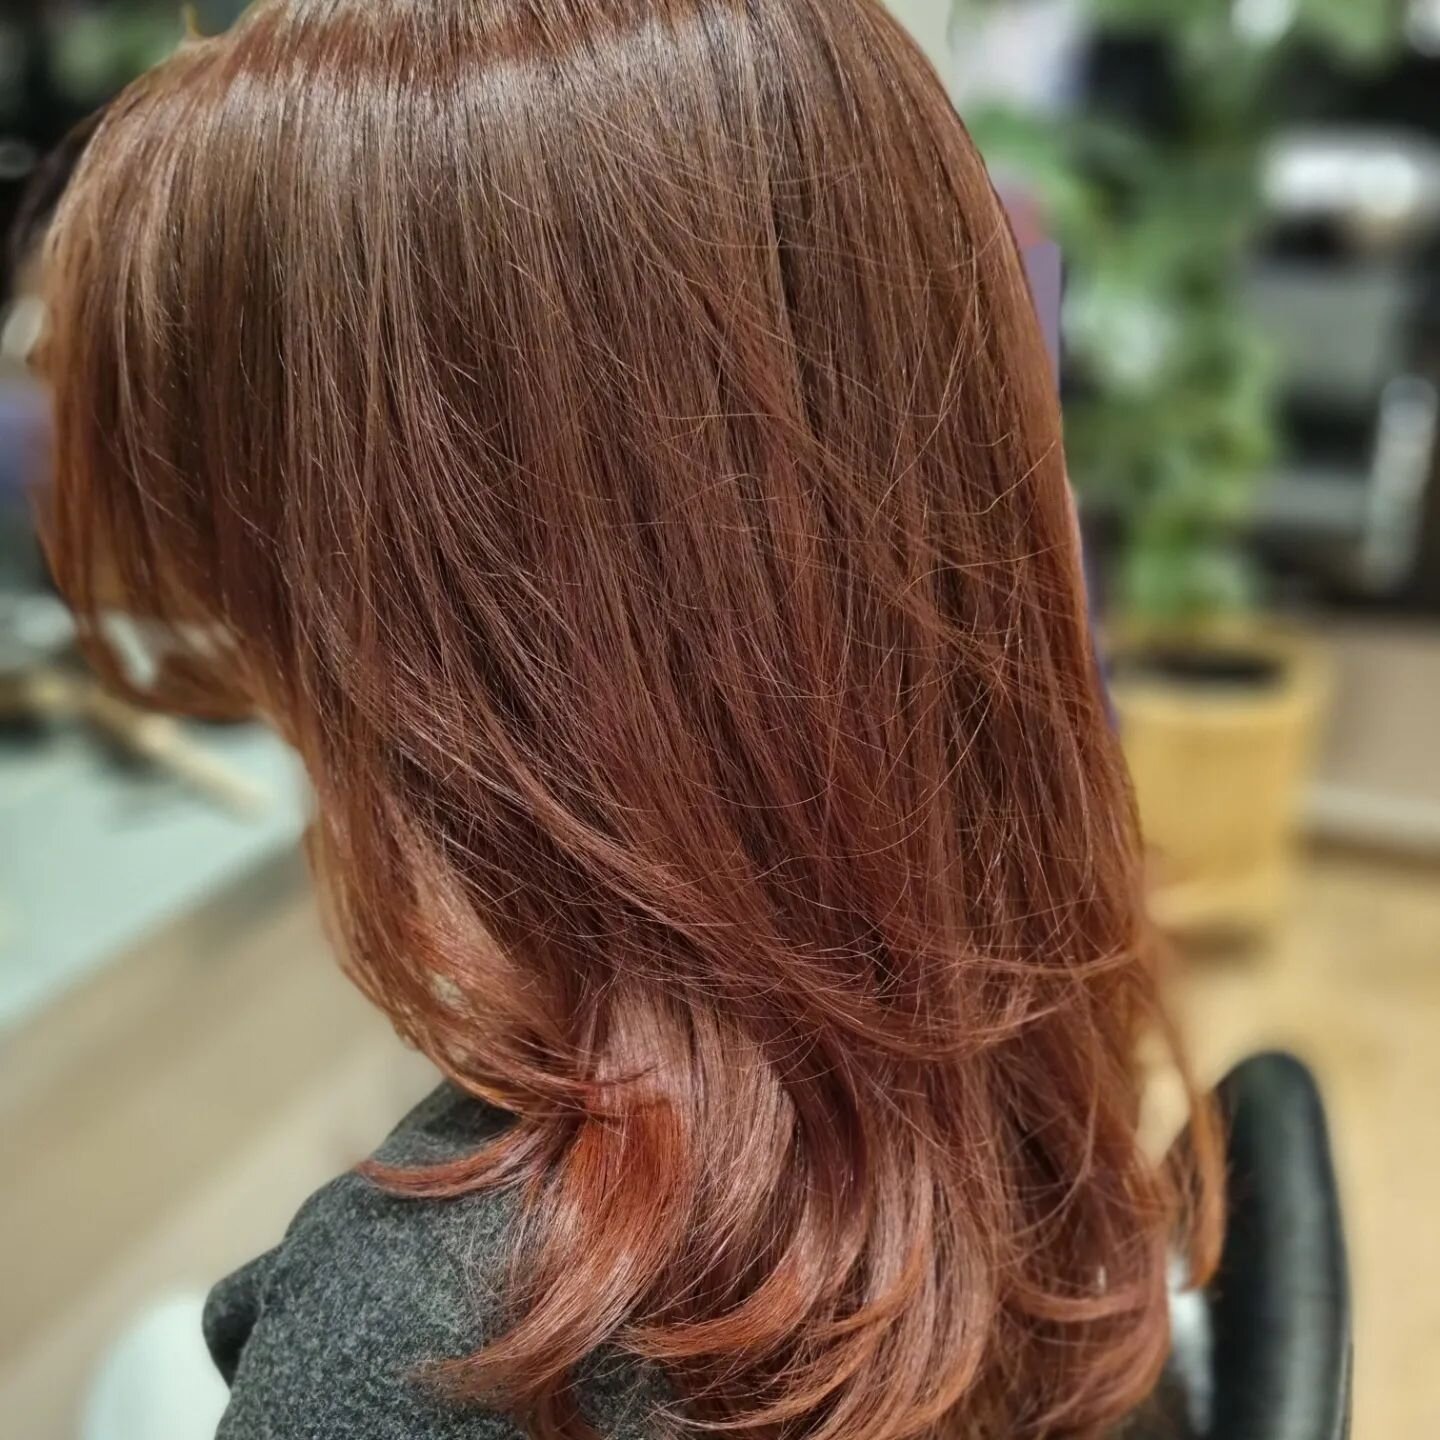 🛑 Red Alert!
Photos didn't do this one justice tonight. We are very happy with our red with slight copper undertones. She's been to 4 other salons to get the red she wanted and bam! We did it. 

Sending her home with the right shampoo and conditione